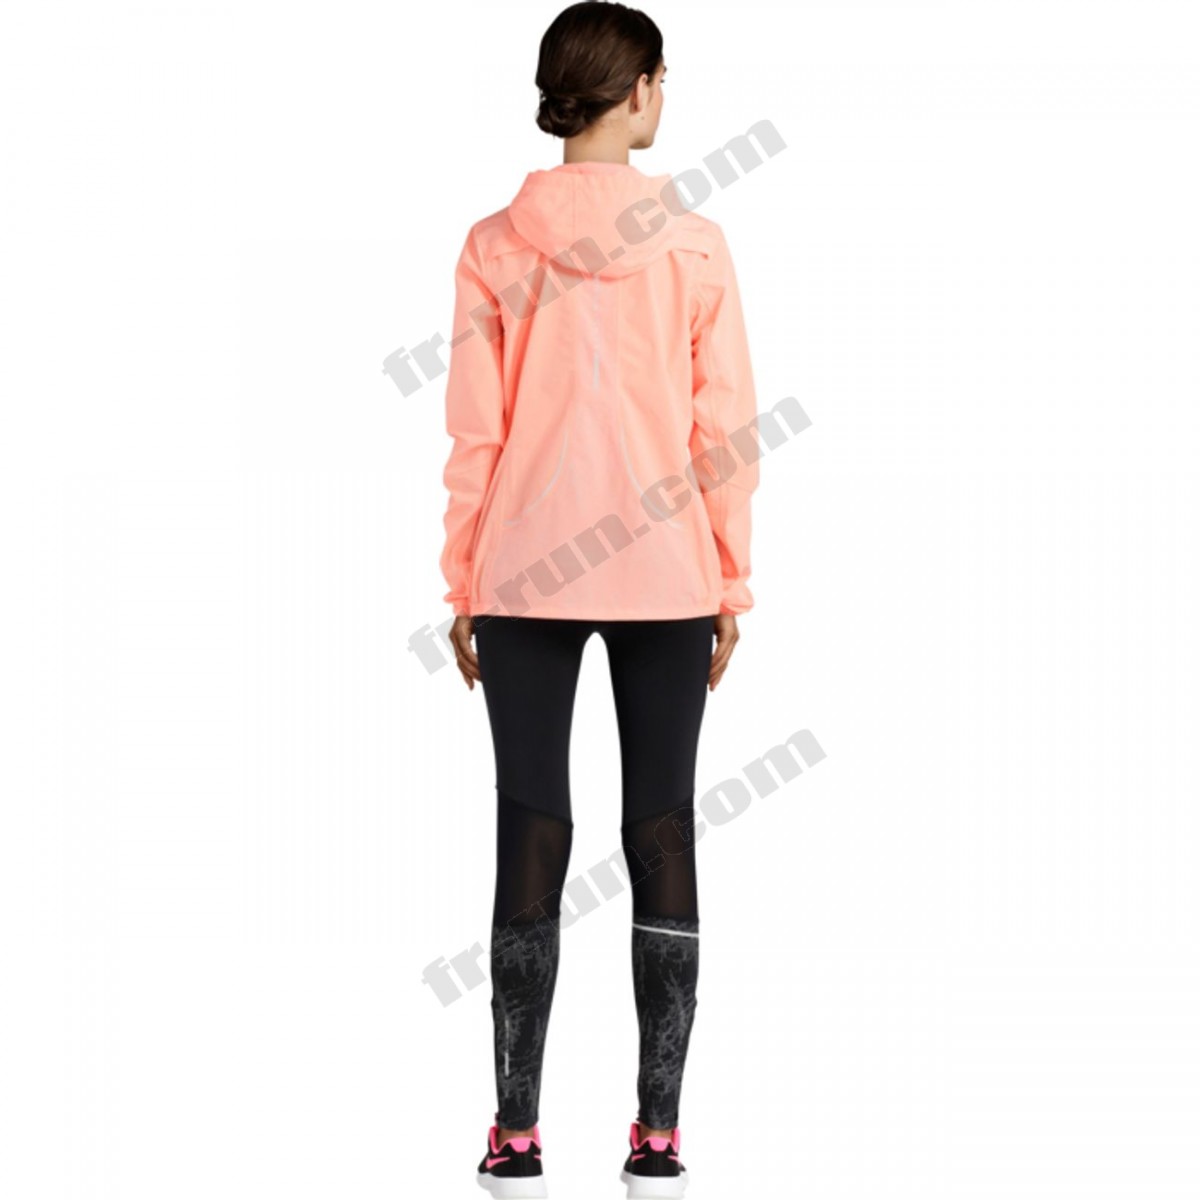 Athlitech/COUPE-VENT running femme ATHLITECH KLYNE 300 CPP REFLECT √ Nouveau style √ Soldes - -2